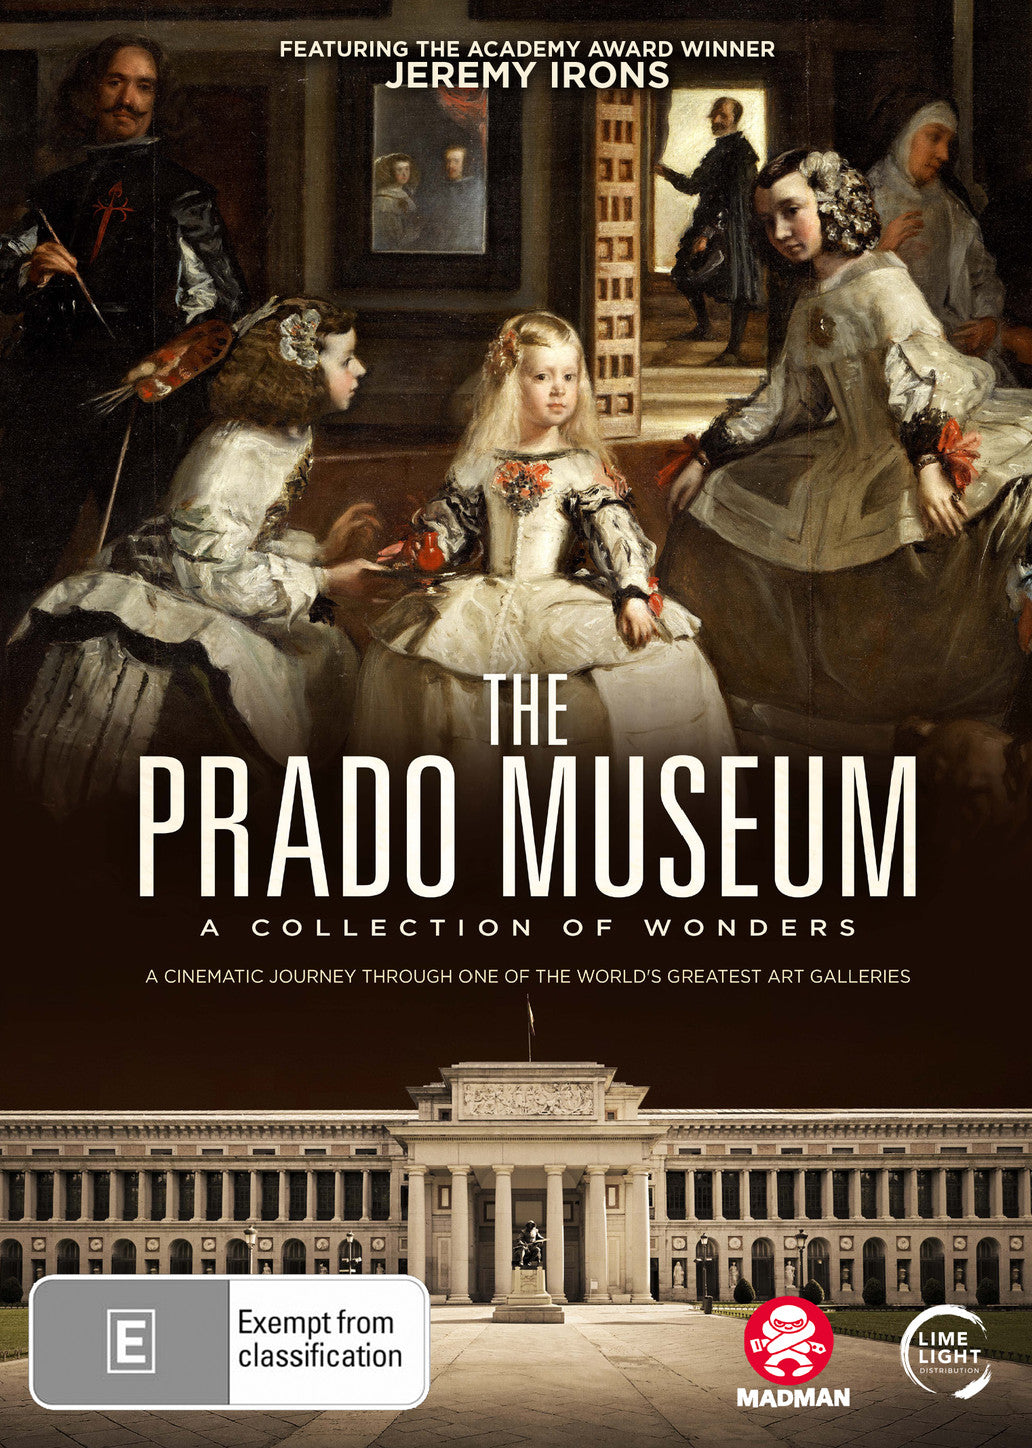 THE PRADO MUSEUM: A COLLECTION OF WONDERS